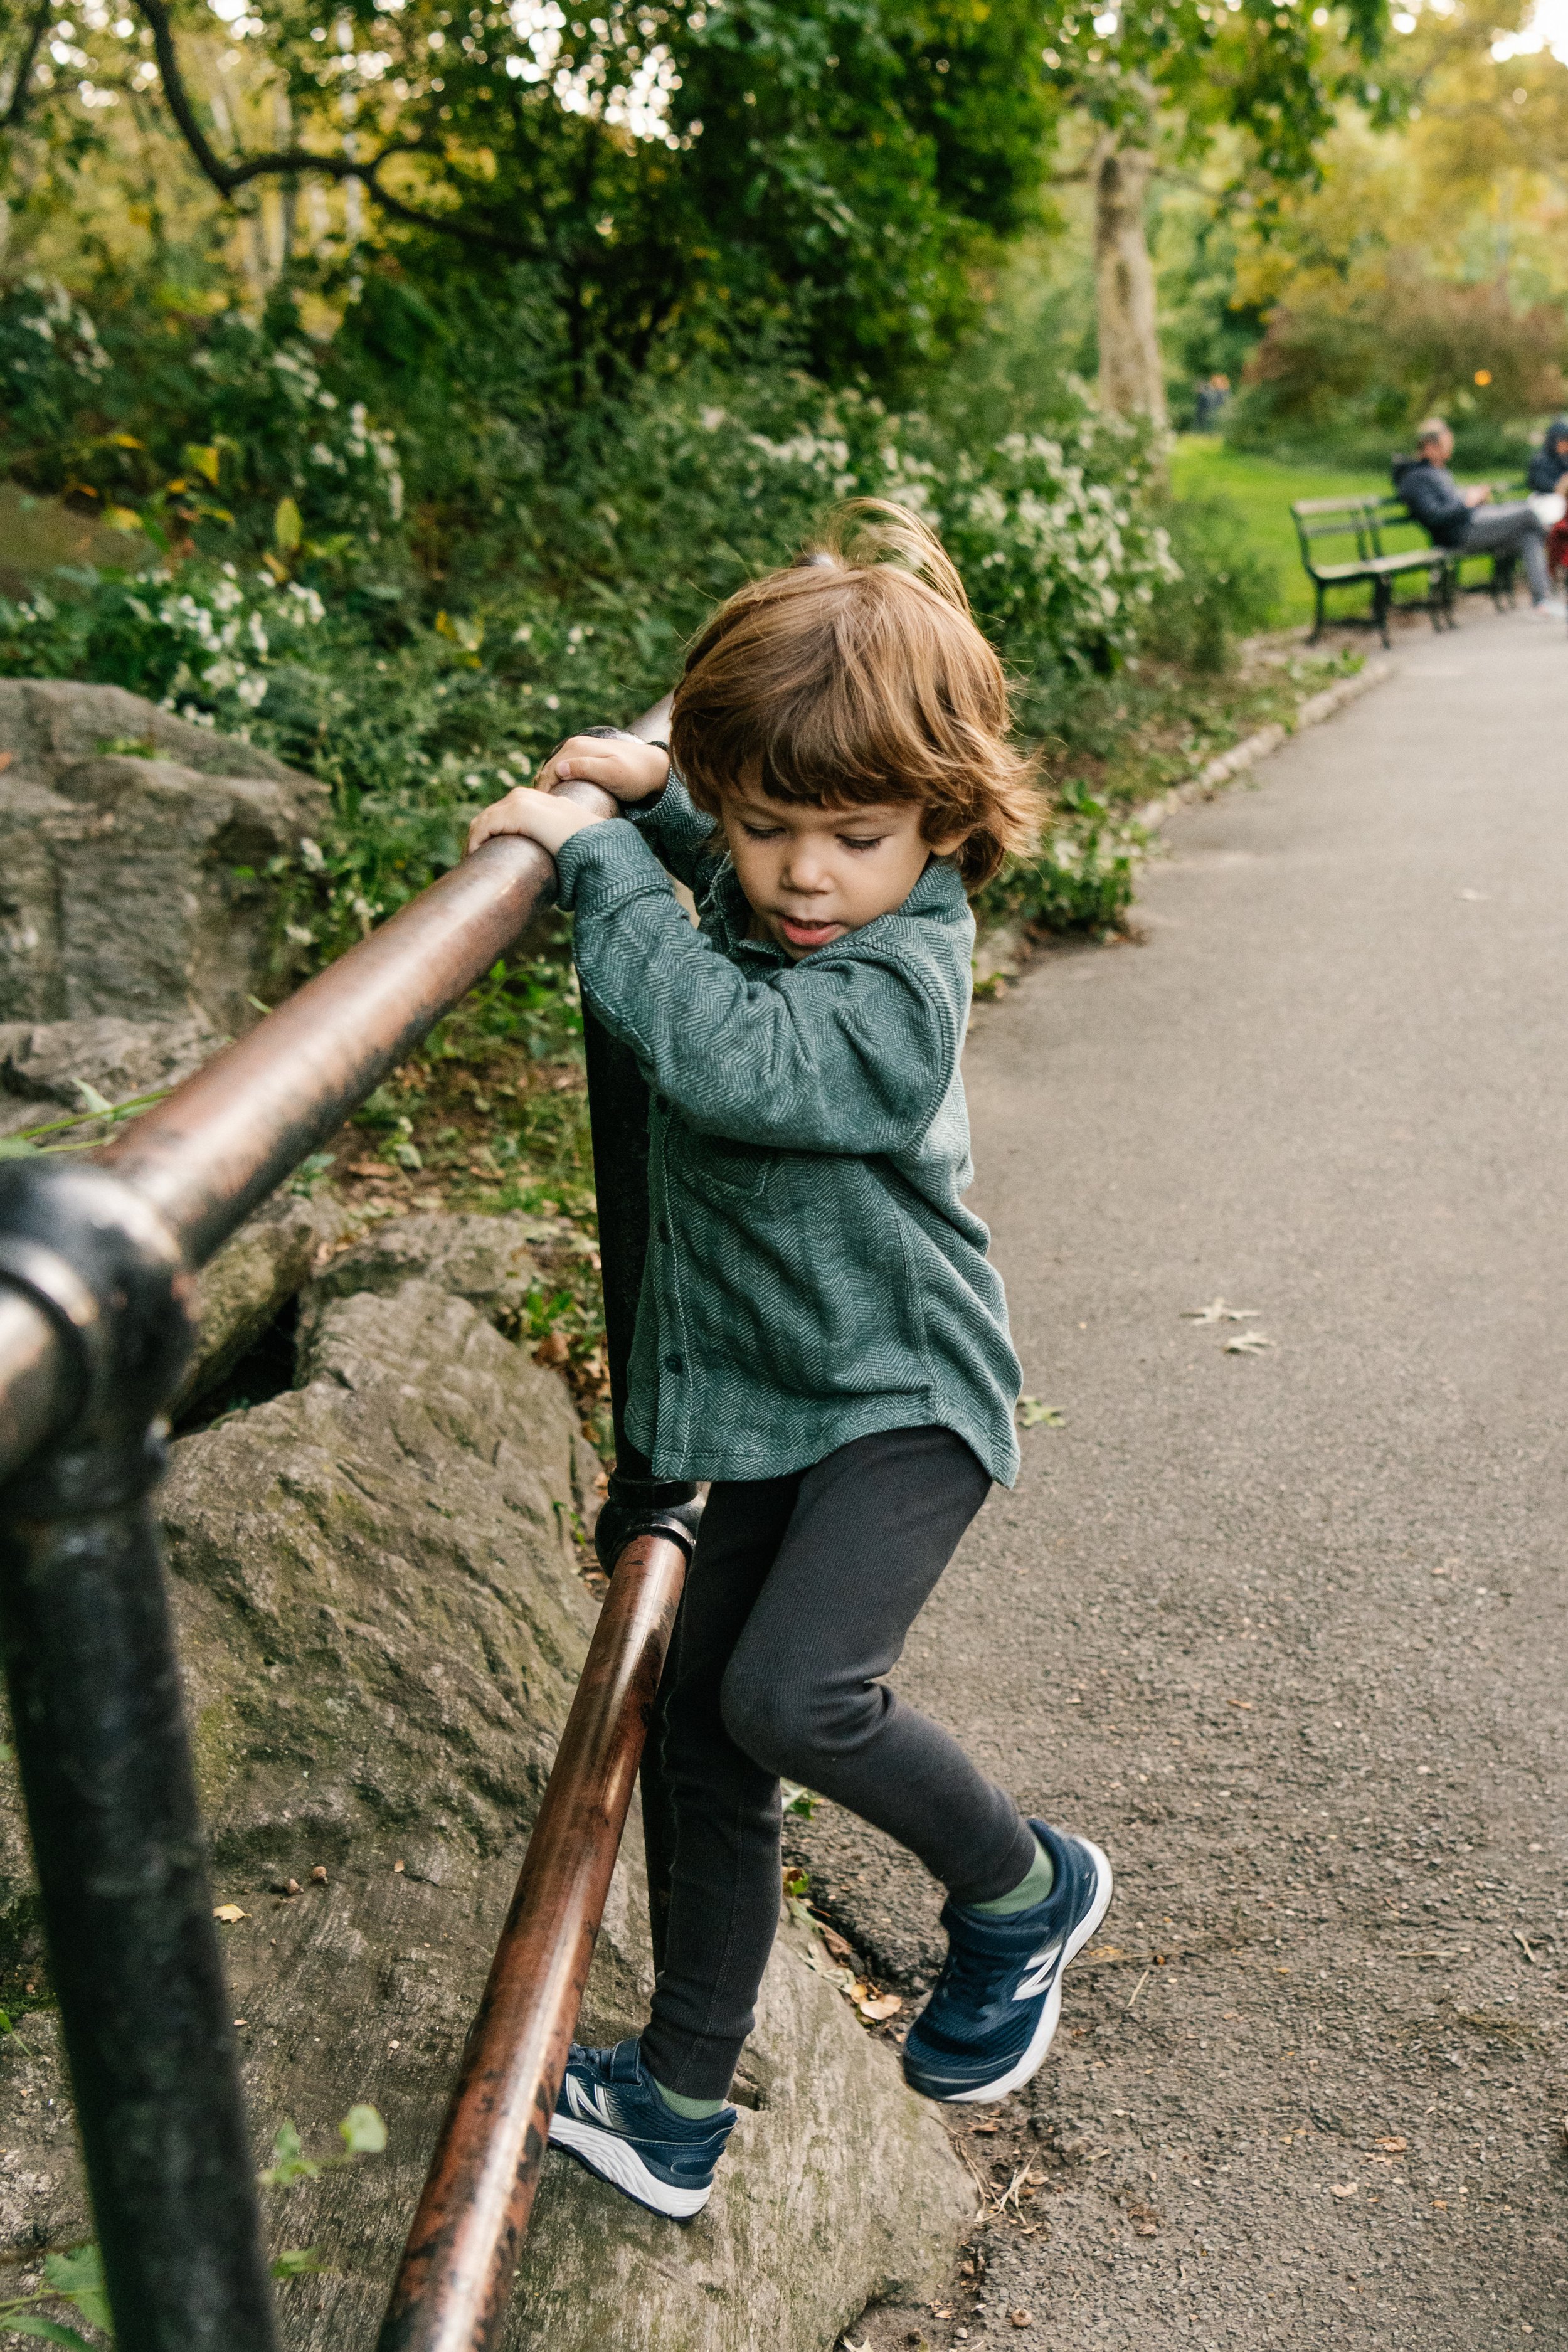  A little boy plays on a railing in Central Park during a family session with Nicole Hawkins PHotography. boy in central park playing child portrait #NicoleHawkinsPhotography #NicoleHawkinsFamilies #NJphotographers #familyphotos #CentralParkPhotograp